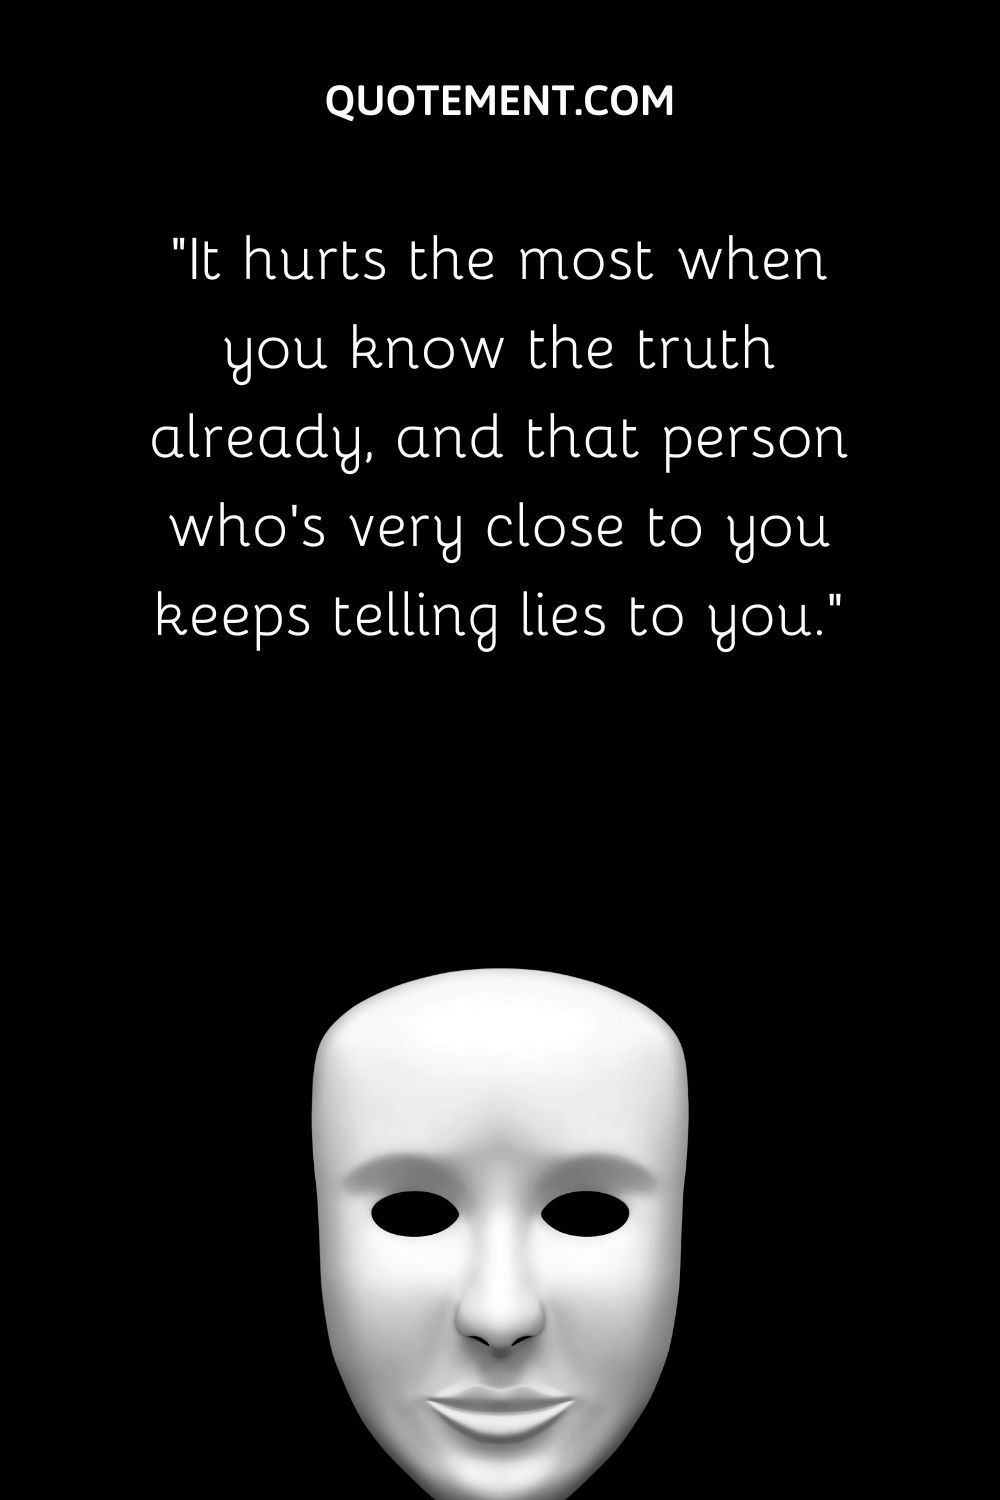 It hurts the most when you know the truth already, and that person who’s very close to you keeps telling lies to you